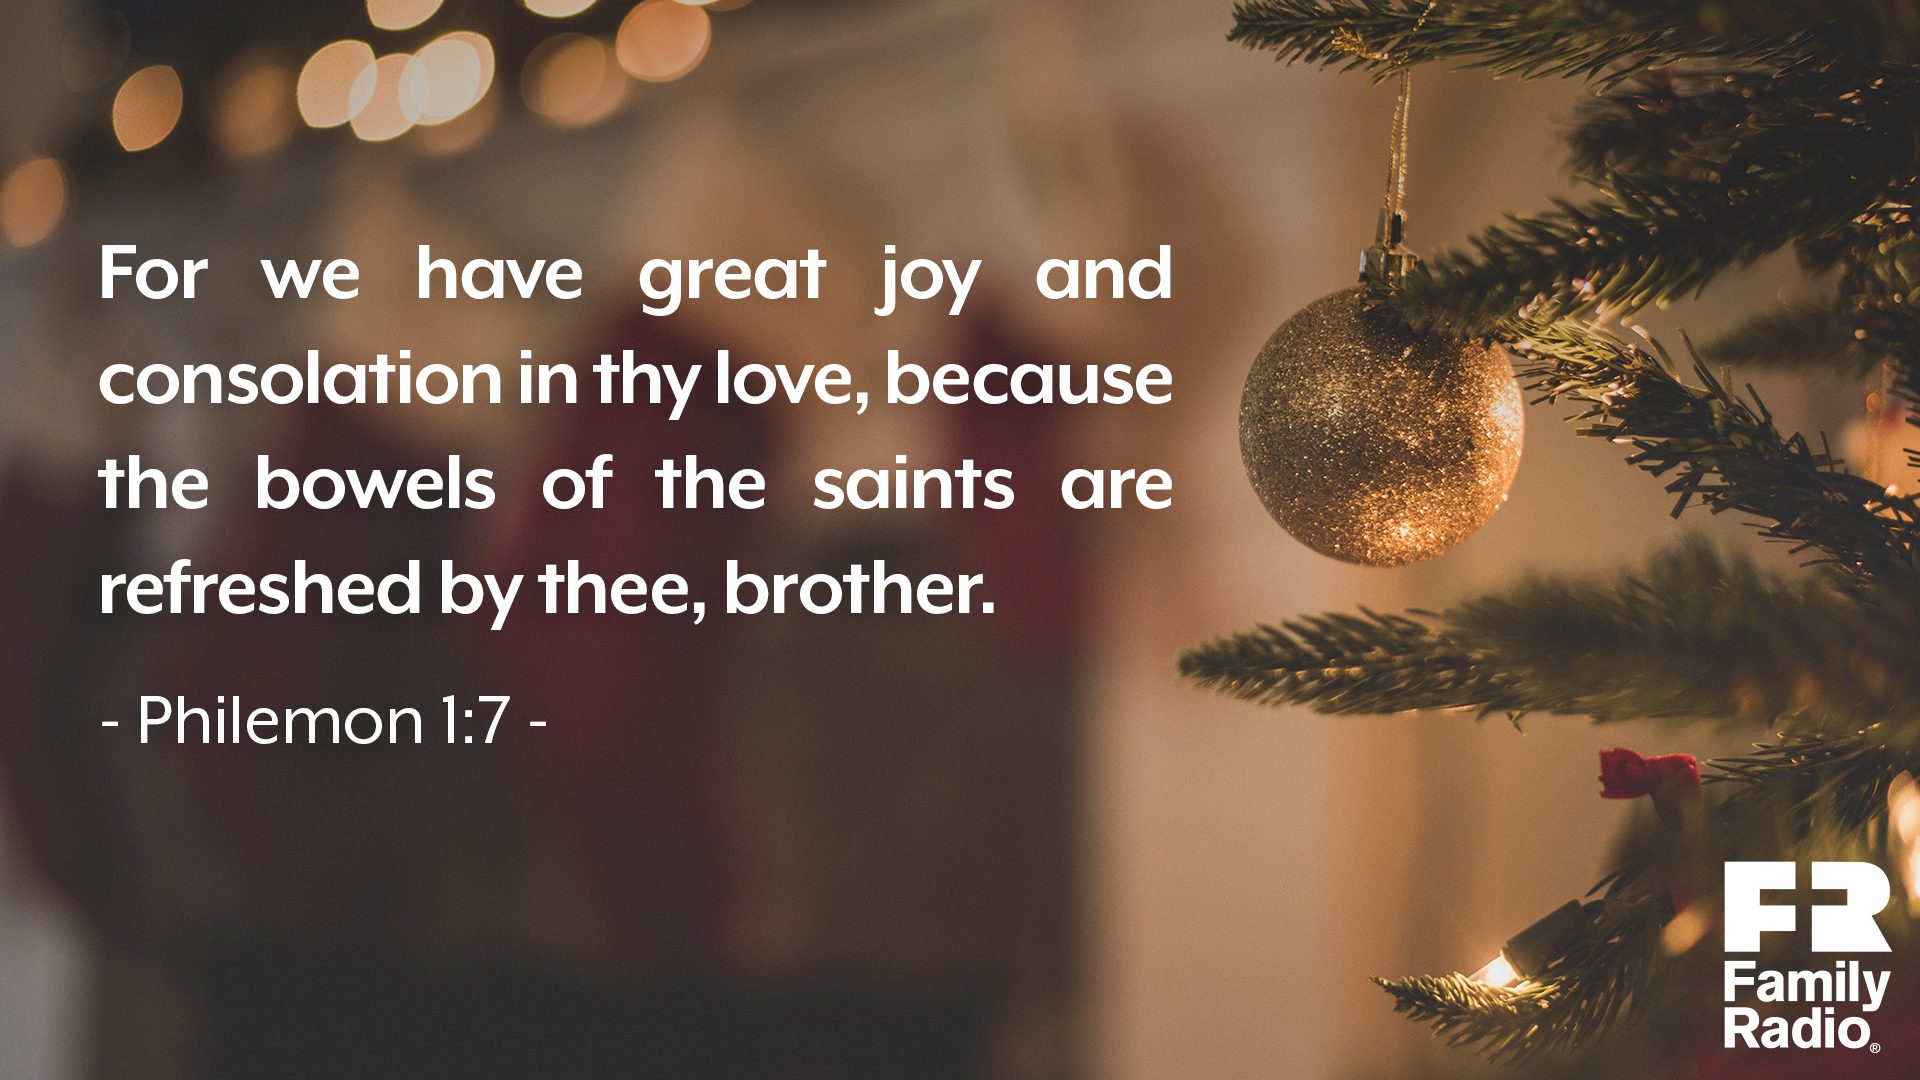 “For we have great joy and consolation in thy love, because the bowels of the saints are refreshed by thee, brother.” 